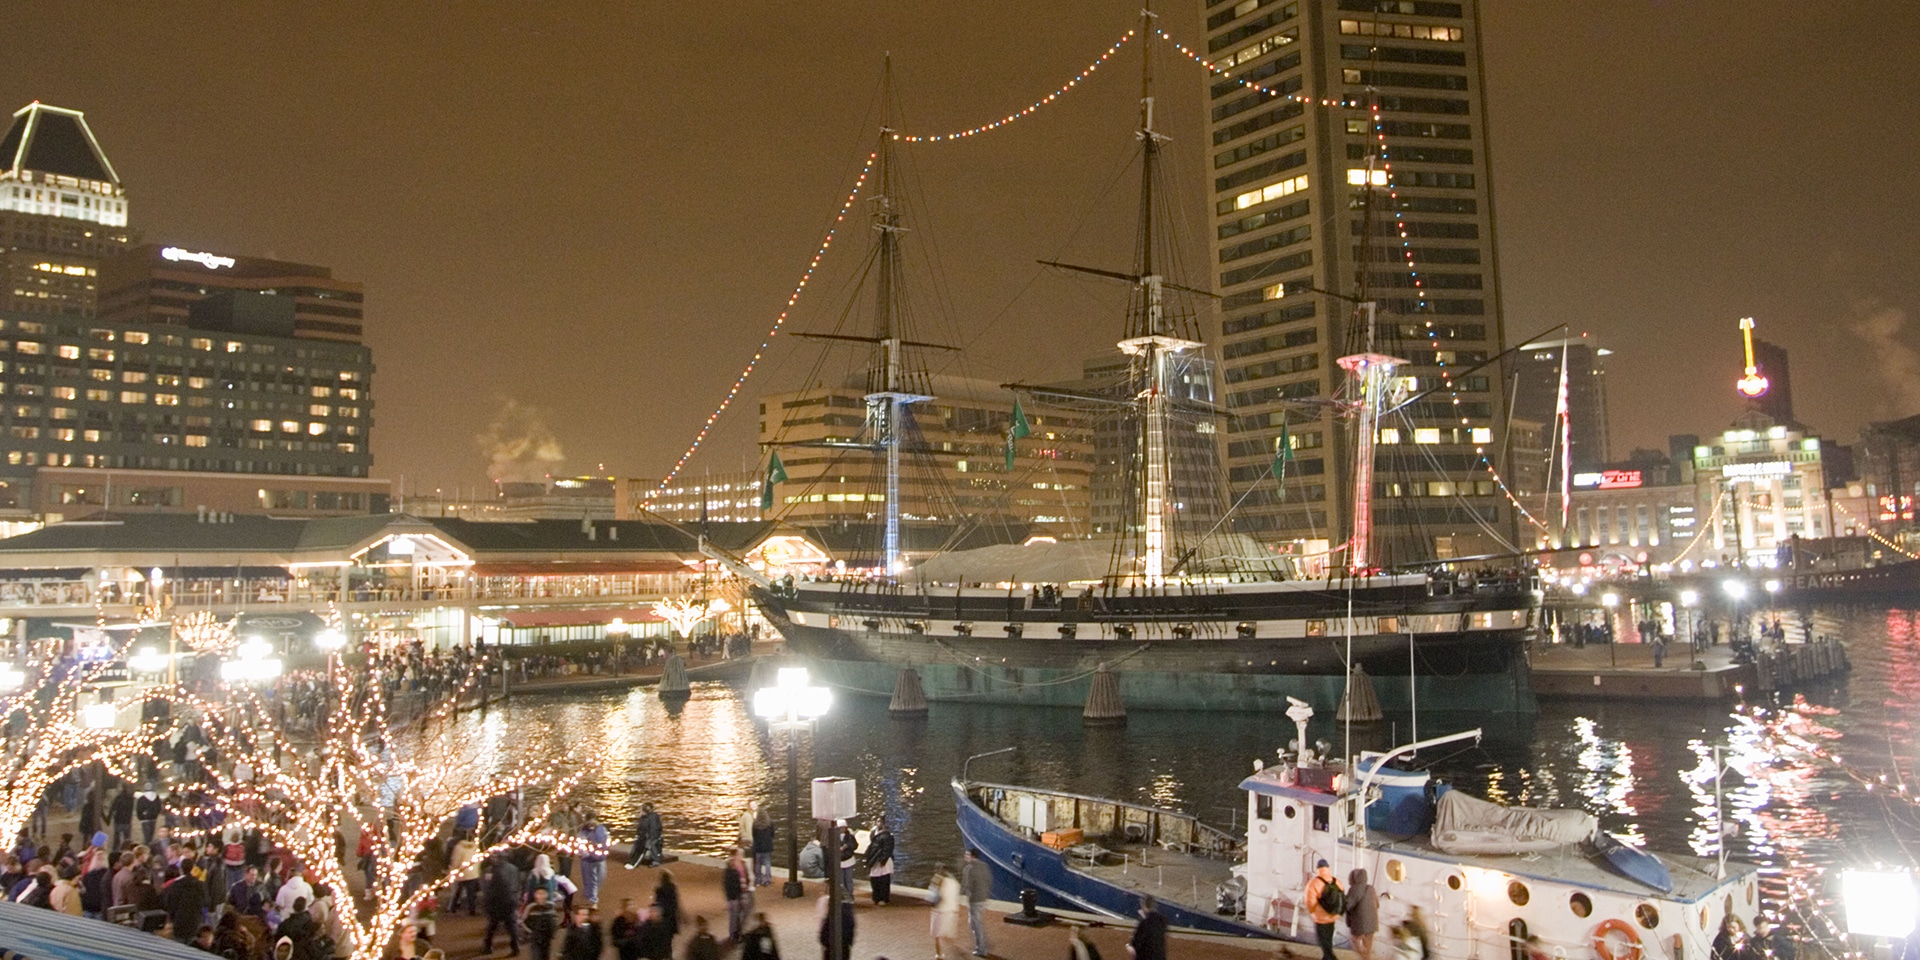 A boat docked in Baltimore's Inner Harbor with holiday lights illuminating its voyage.